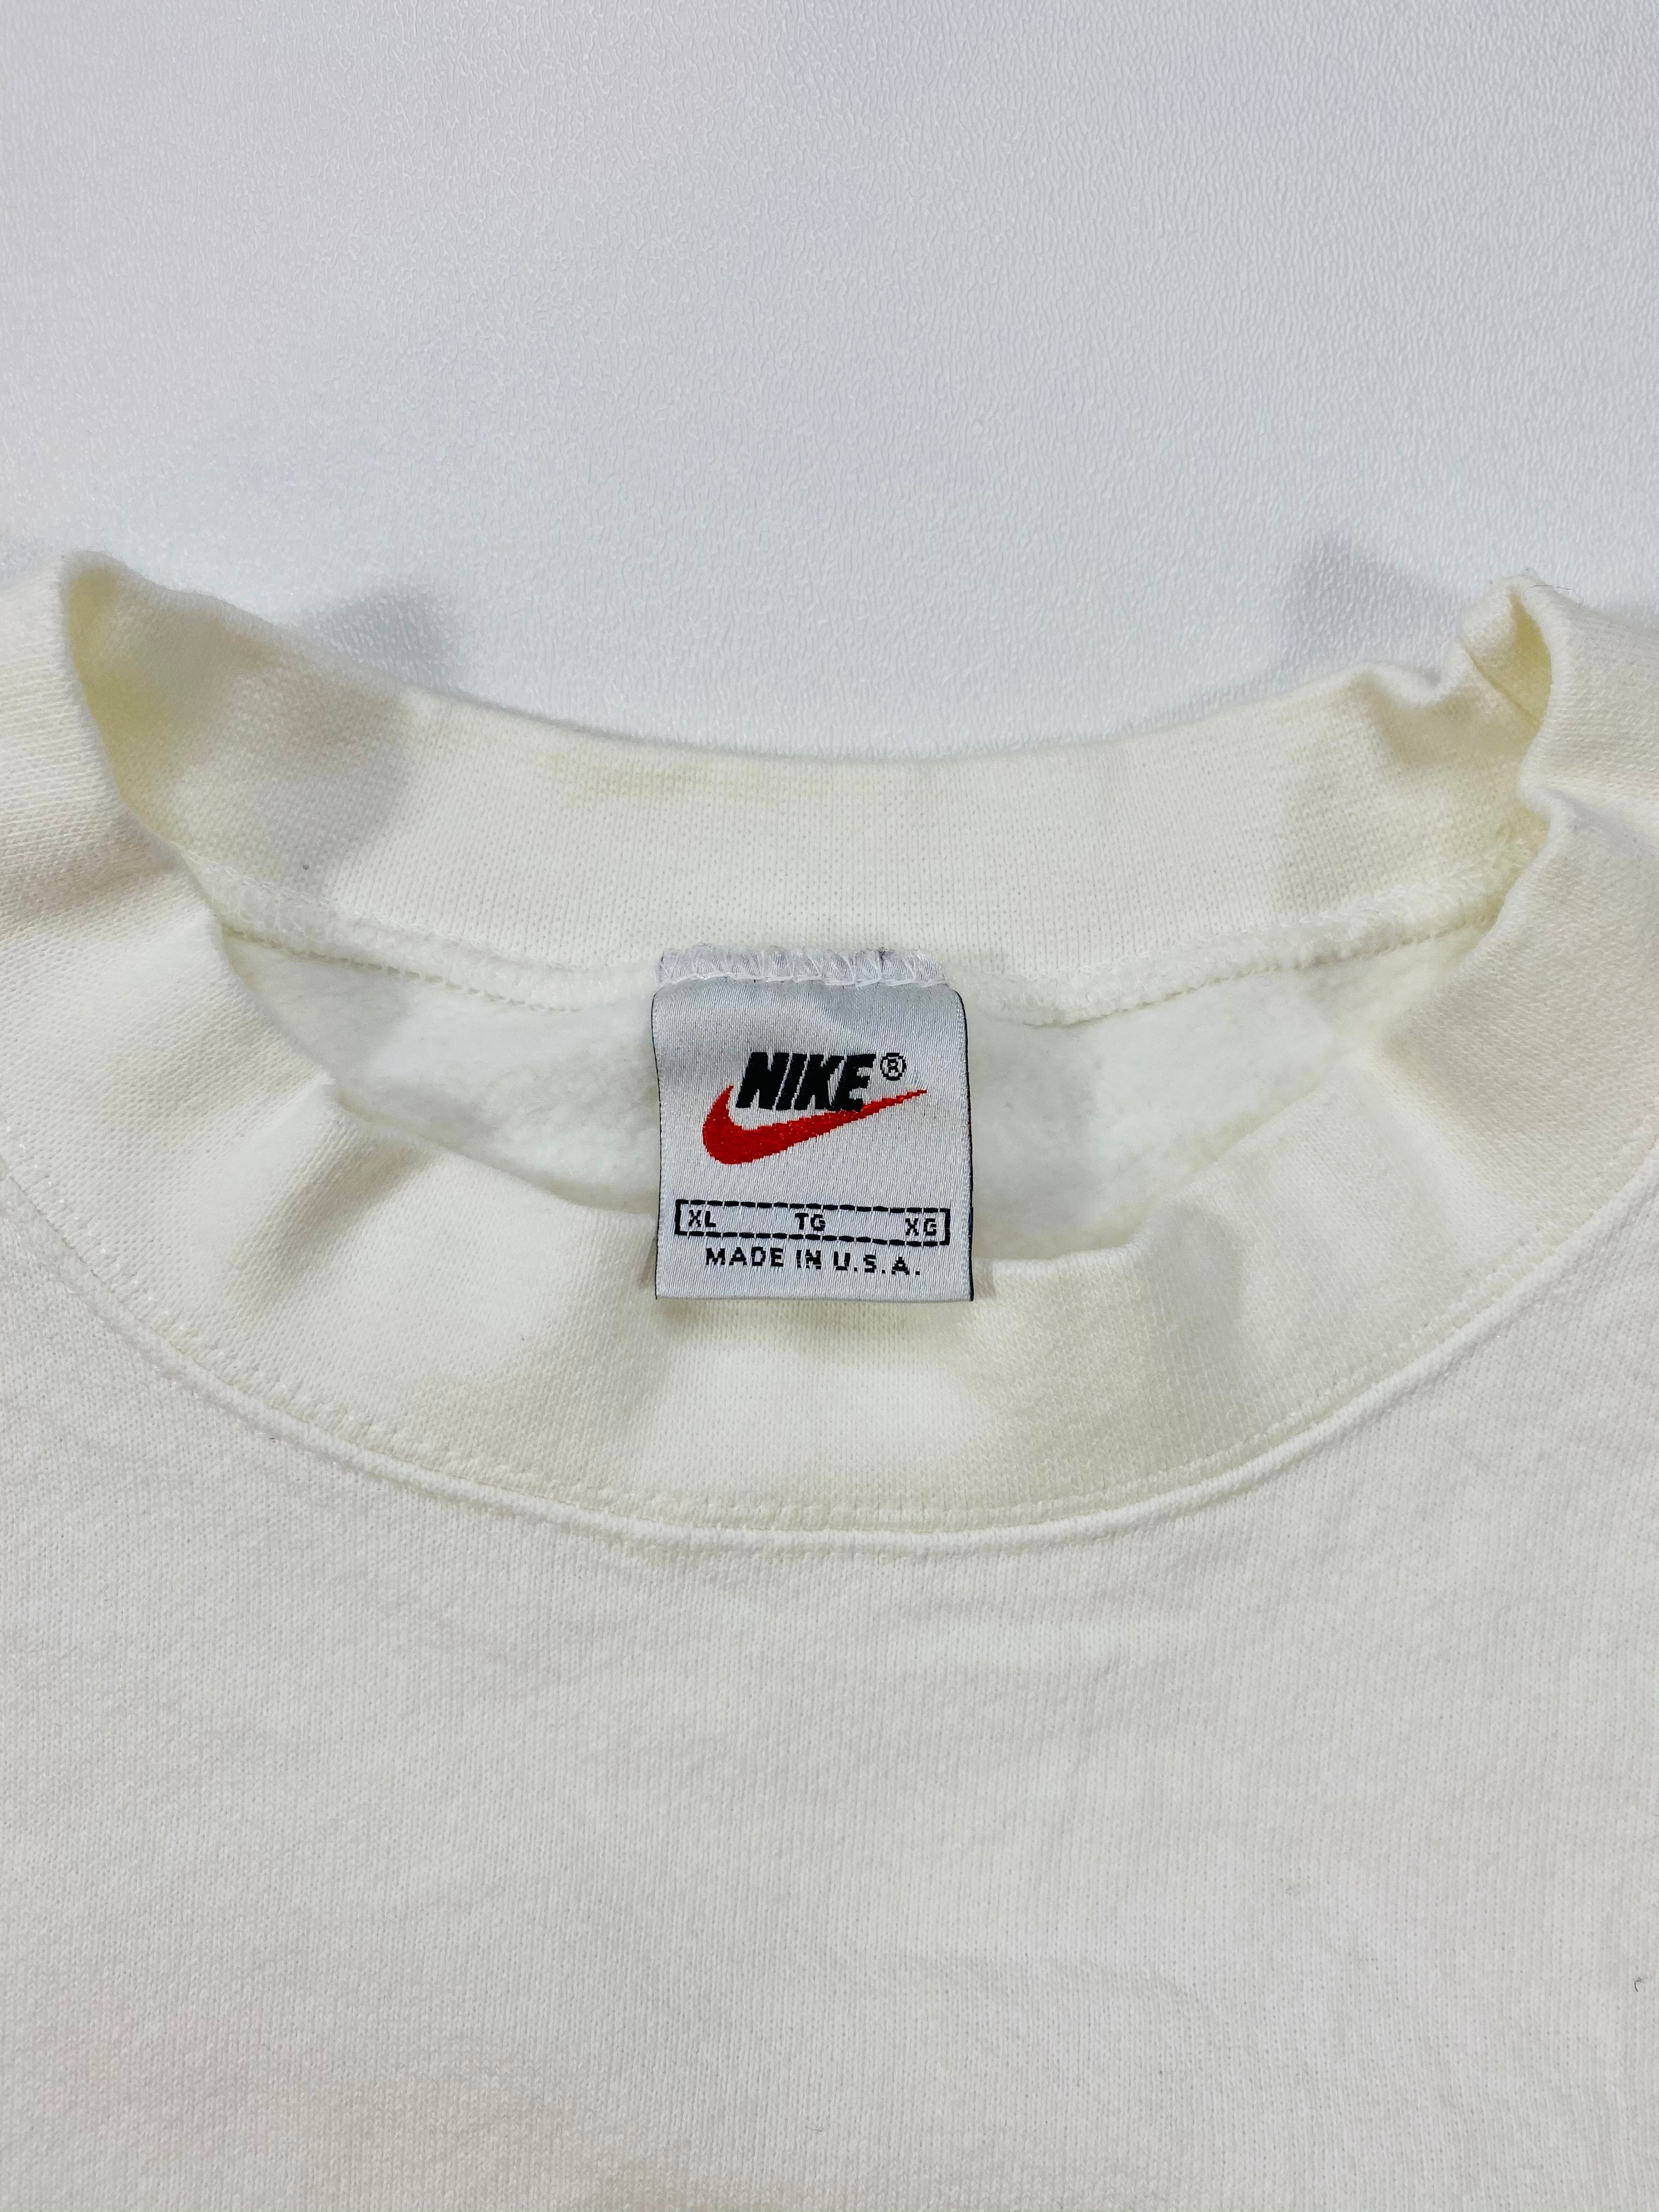 90's NIKE TOWN Size XL Made in USA Vintage Sweat-shirt / 6046 